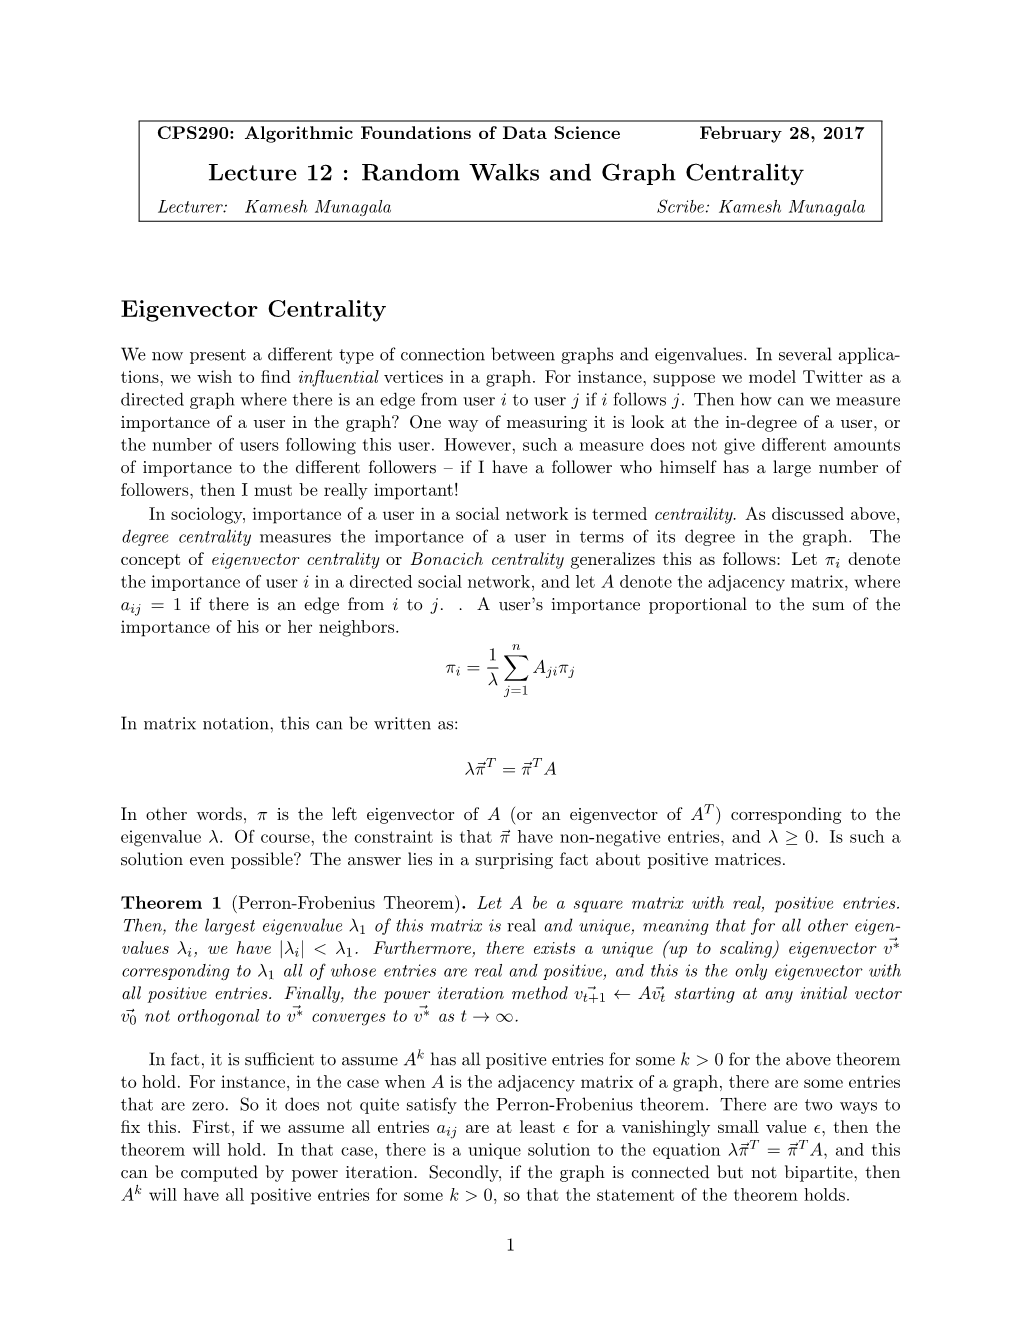 Lecture 12 : Random Walks and Graph Centrality Eigenvector Centrality